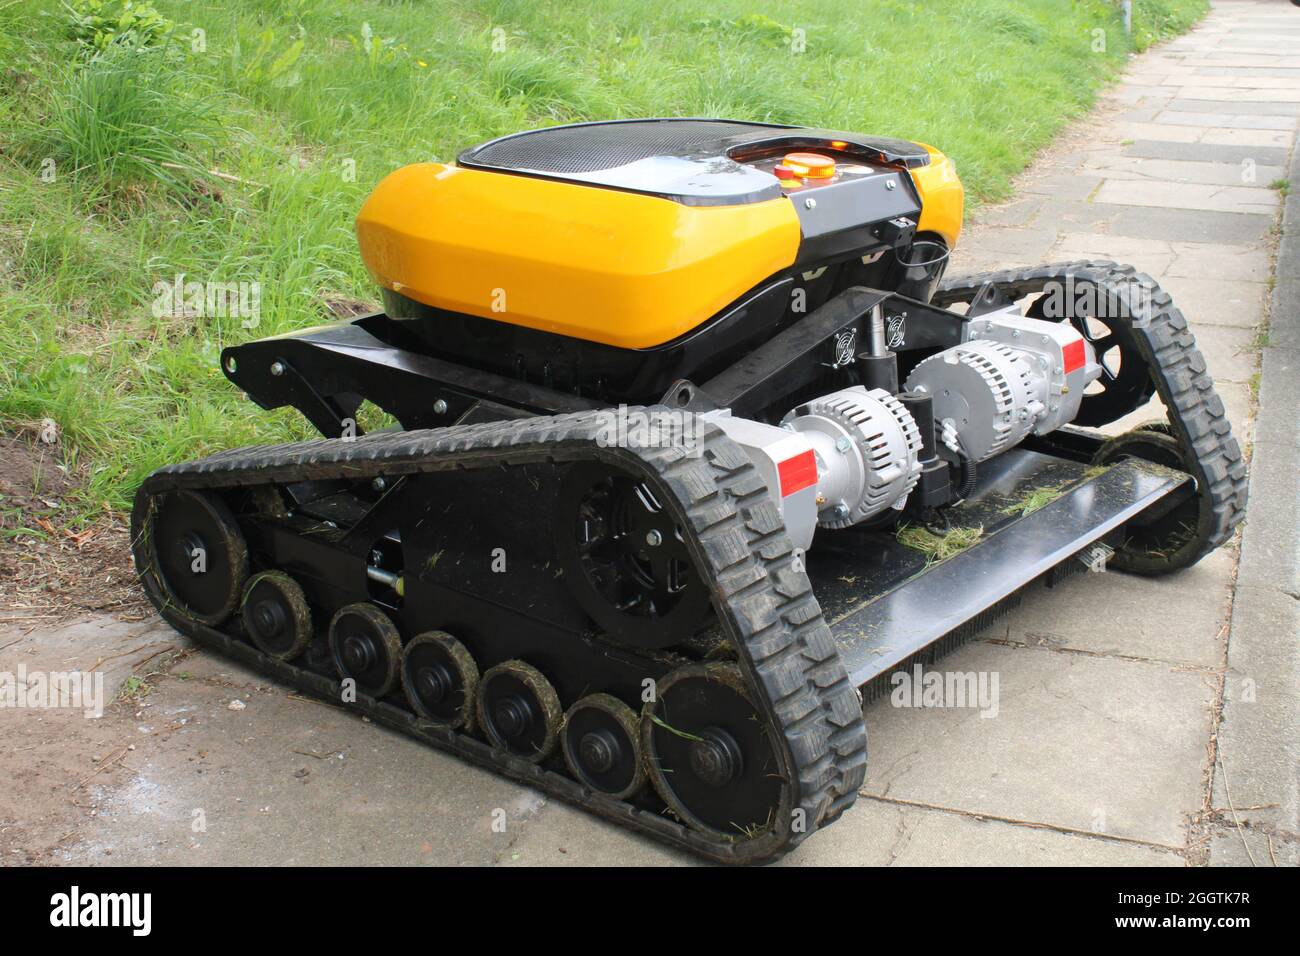 Robotic caterpillar tracked industrial lawnmower and bush cutter Stock Photo